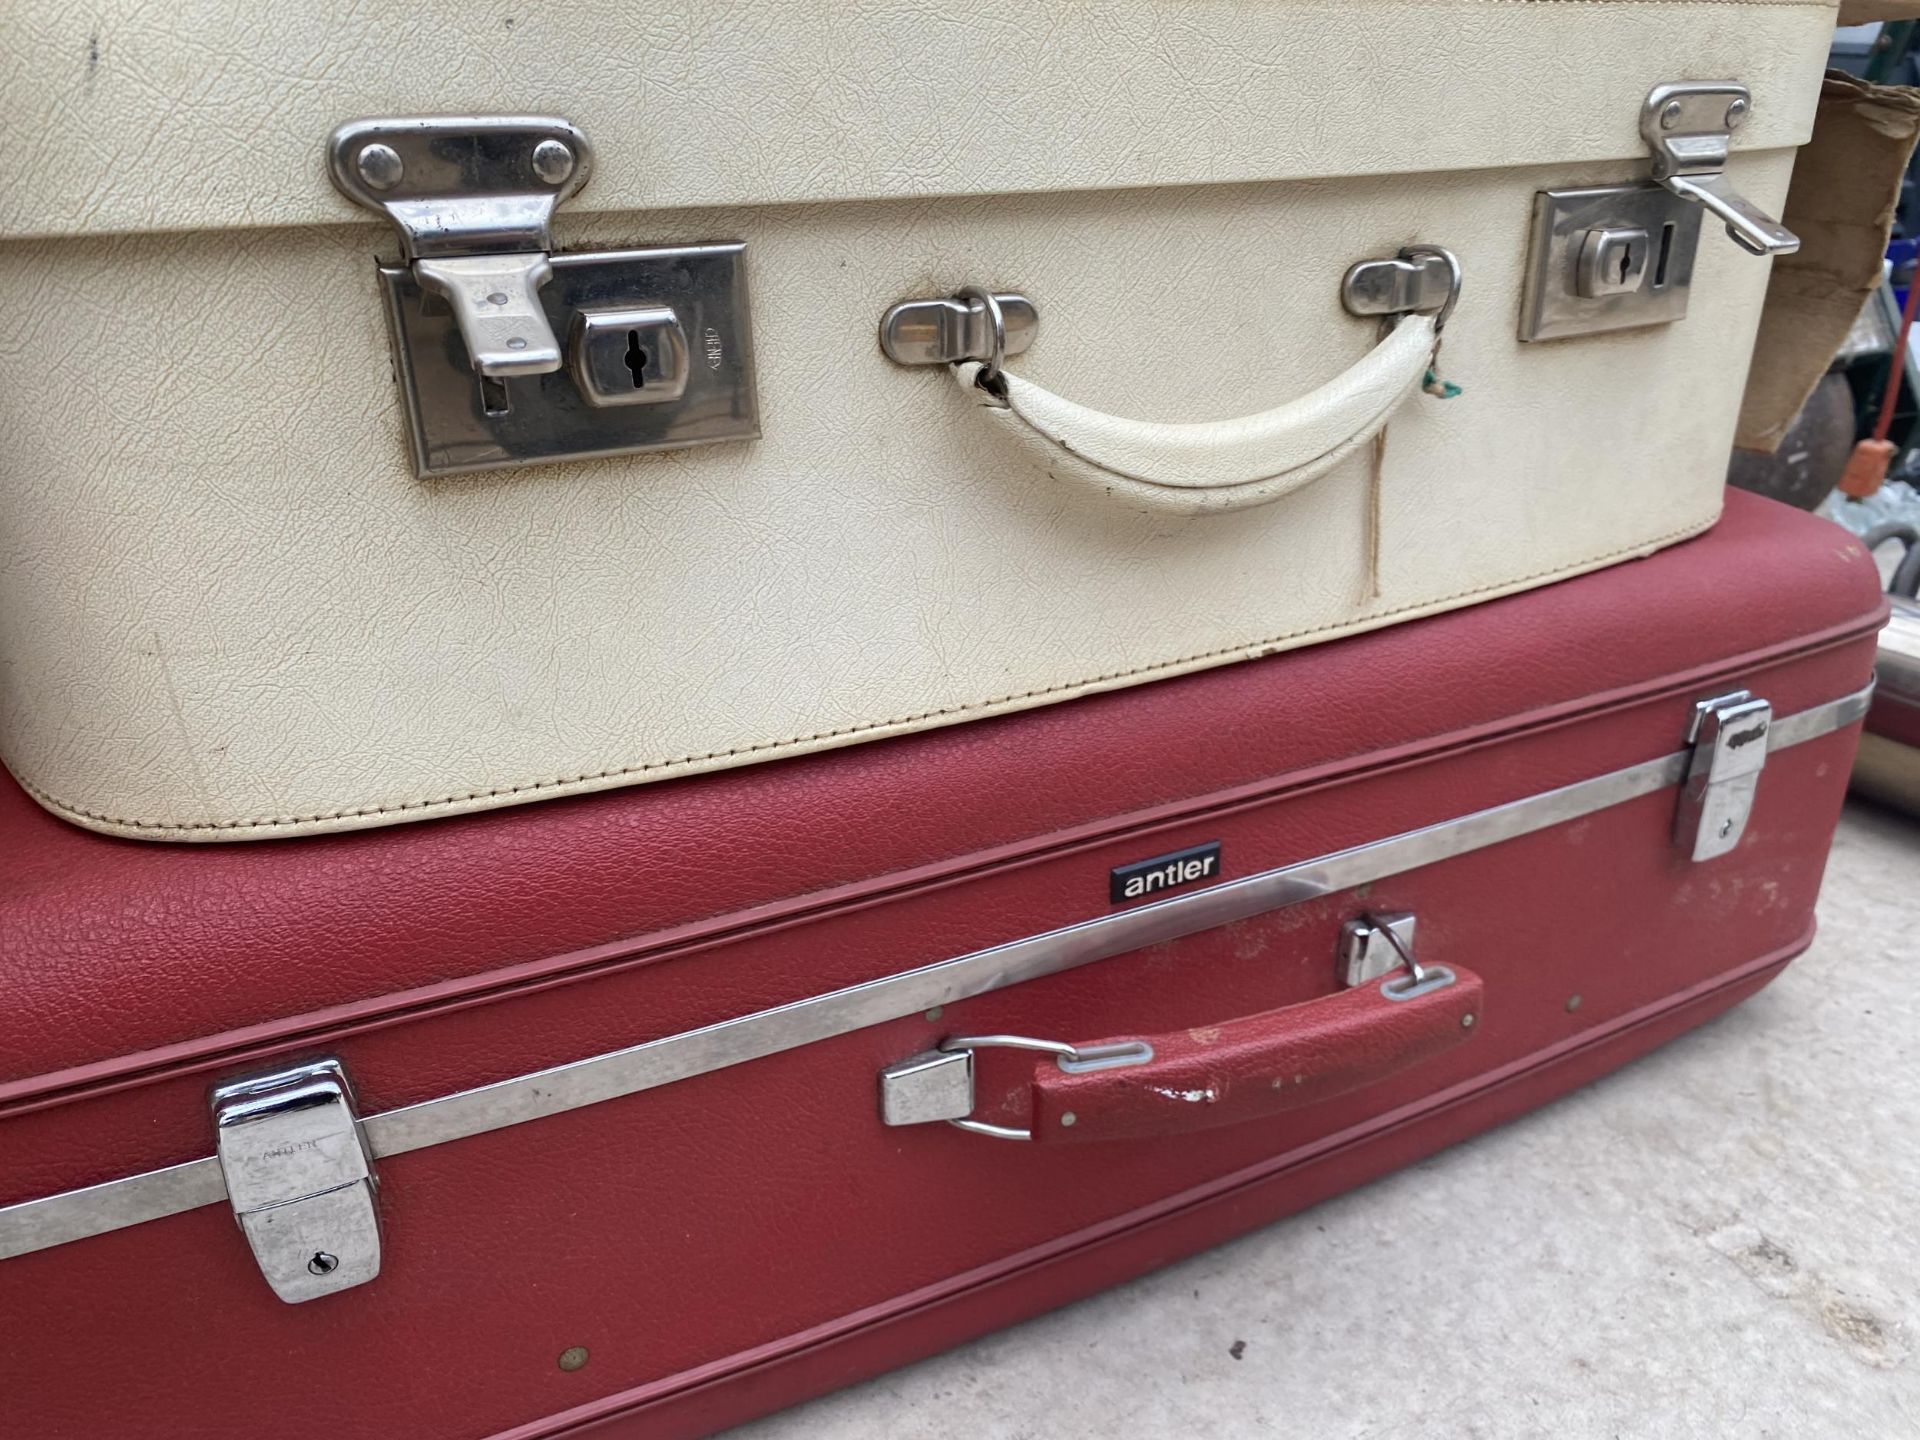 THREE VINTAGE TRAVEL CASES TO INCLUDE AN ANTLER - Image 4 of 4